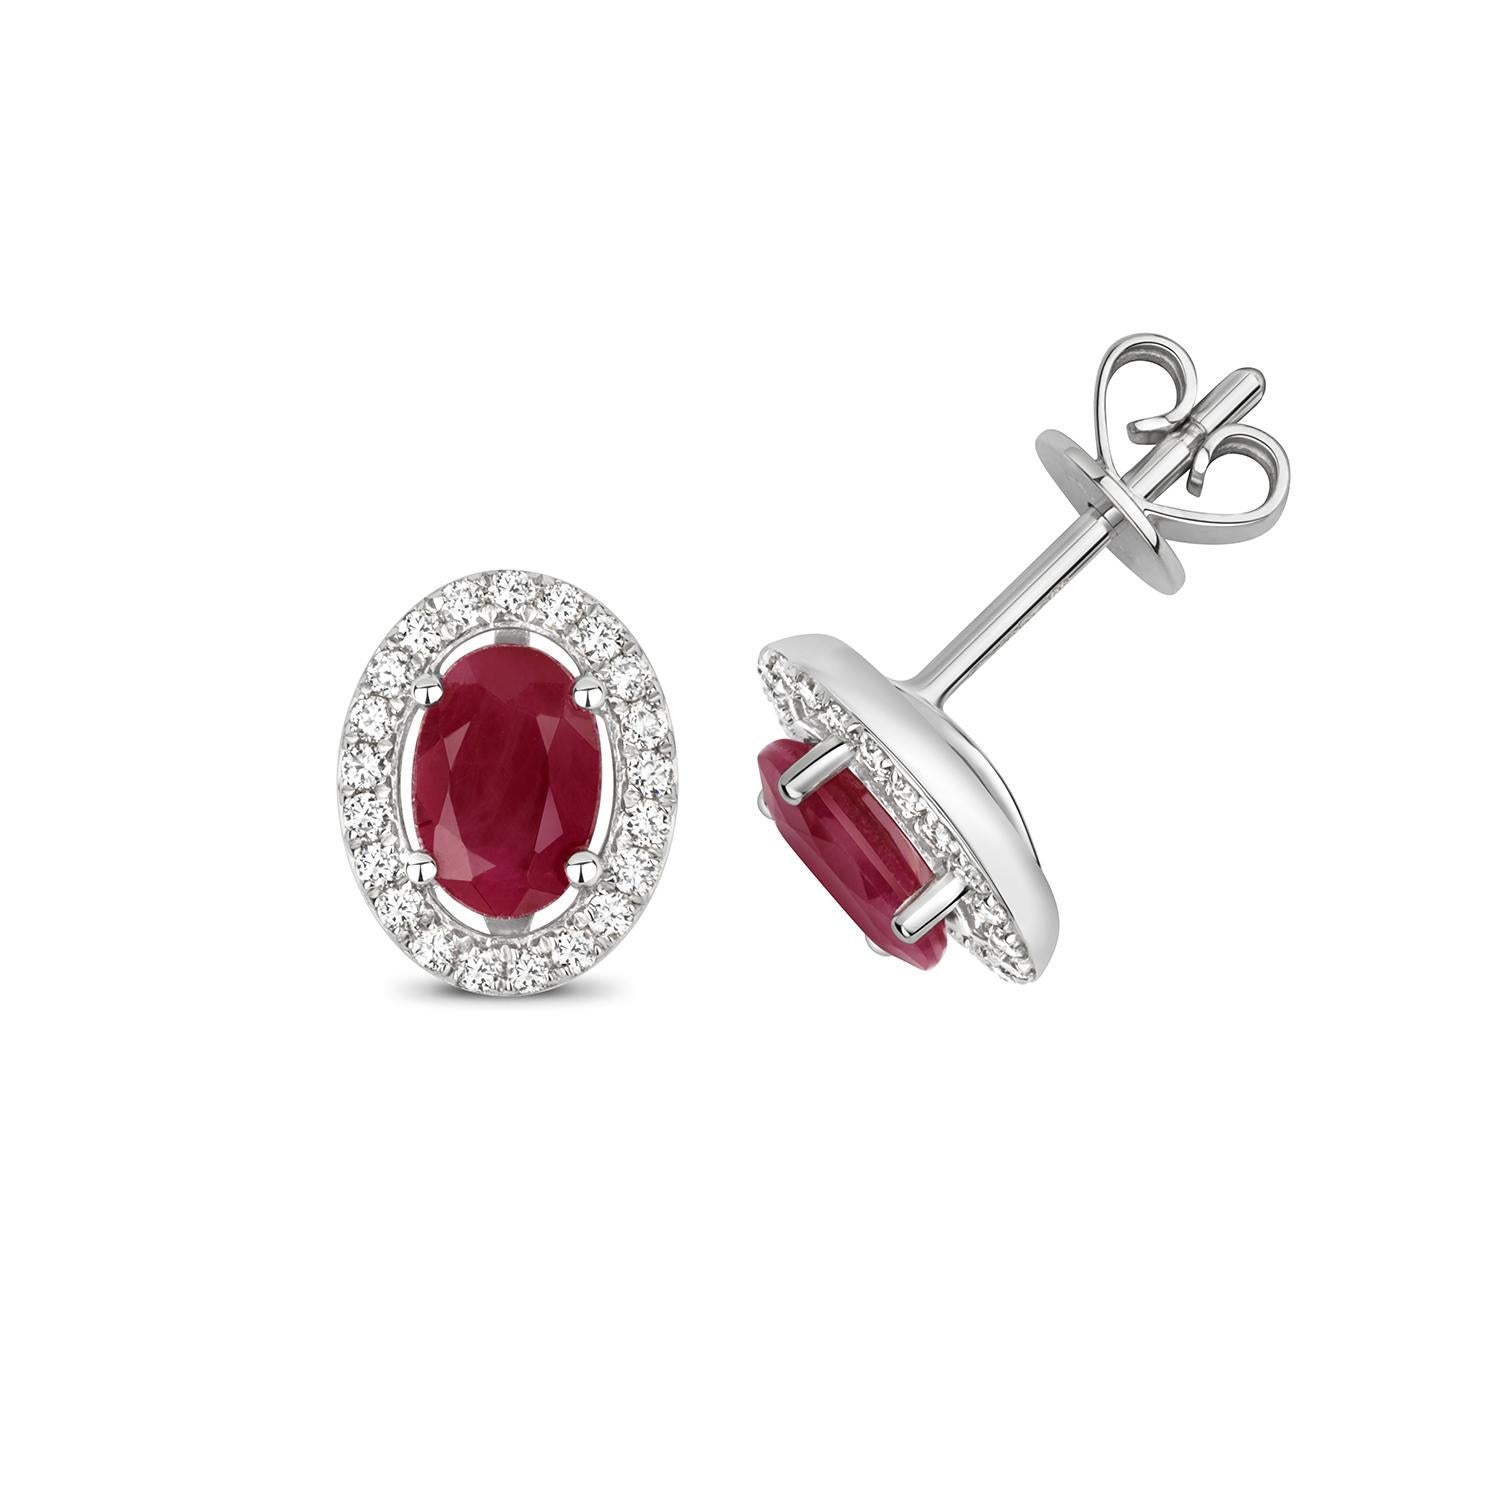 DIAMOND AND RUBY HALO STUDS OVAL

9K W/G 42RD/0.18 2RUB/1.14

Weight: 1.4g

Number Of Stones:2+42

Total Carates:1.140+0.180